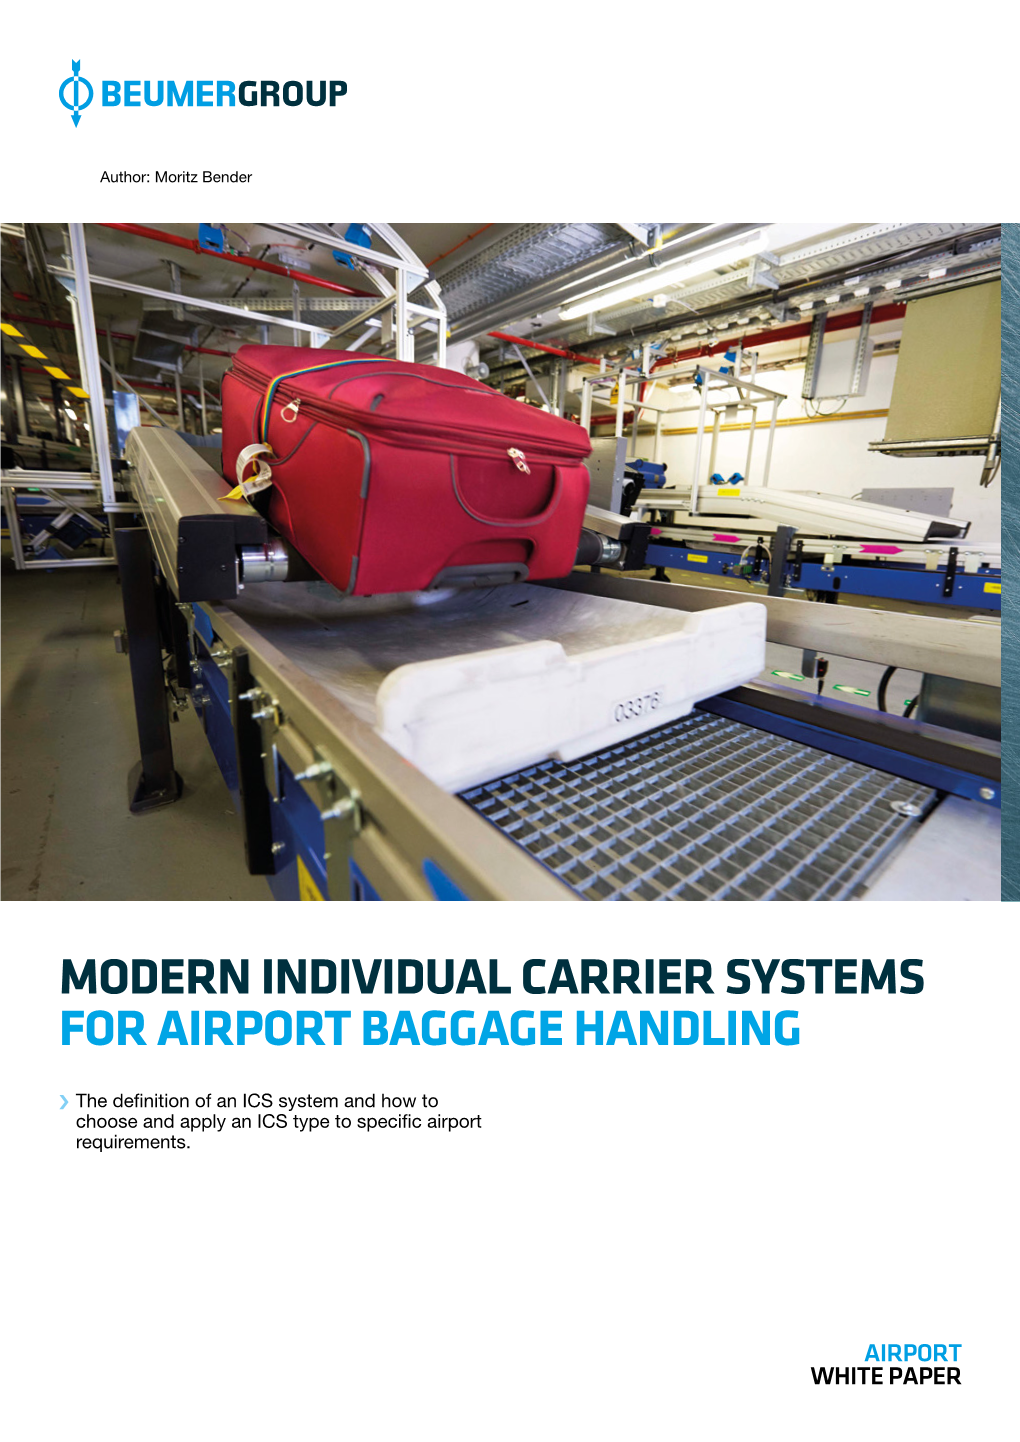 Modern Individual Carrier Systems for Airport Baggage Handling